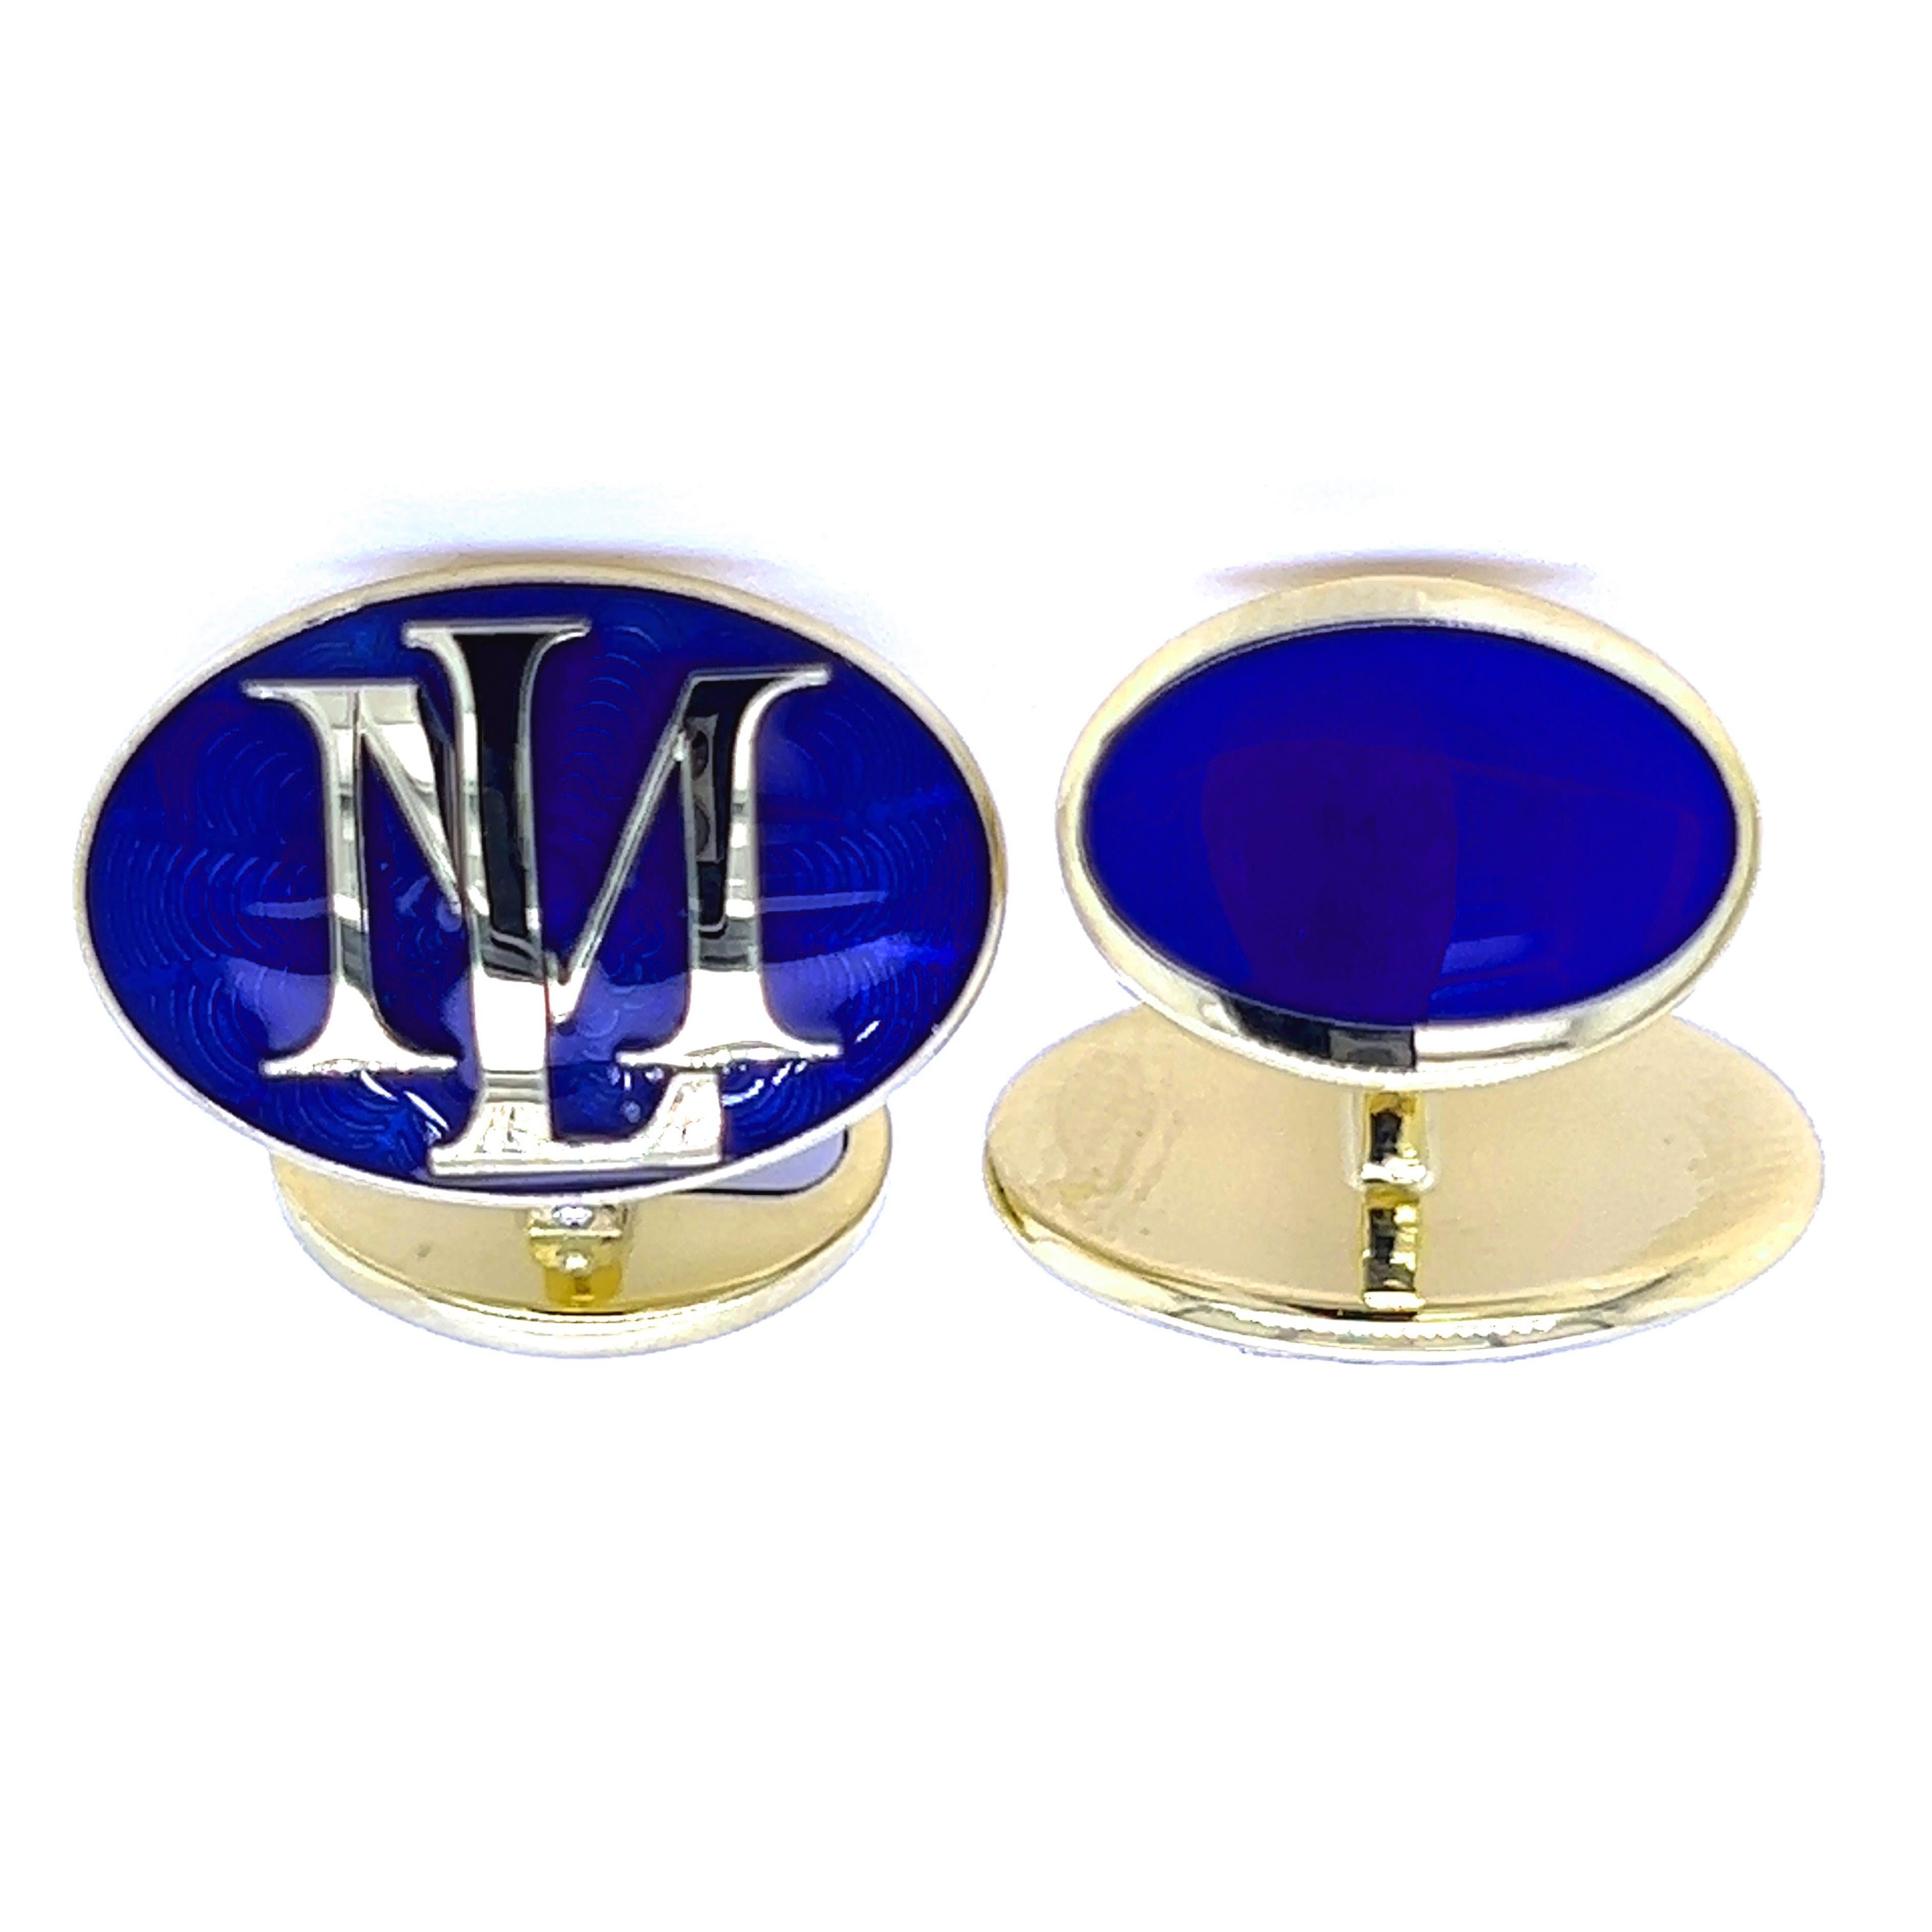 Chic yet Timeless, One-of-a-kind, Oval, Royal Blue Hand Enameled Bespoke Initials Hand Engraved 18kt White and Yellow Gold Cufflinks. The Cufflink back is carefully hand enameled as well.
We are pleased to offer Customization with your own initials.